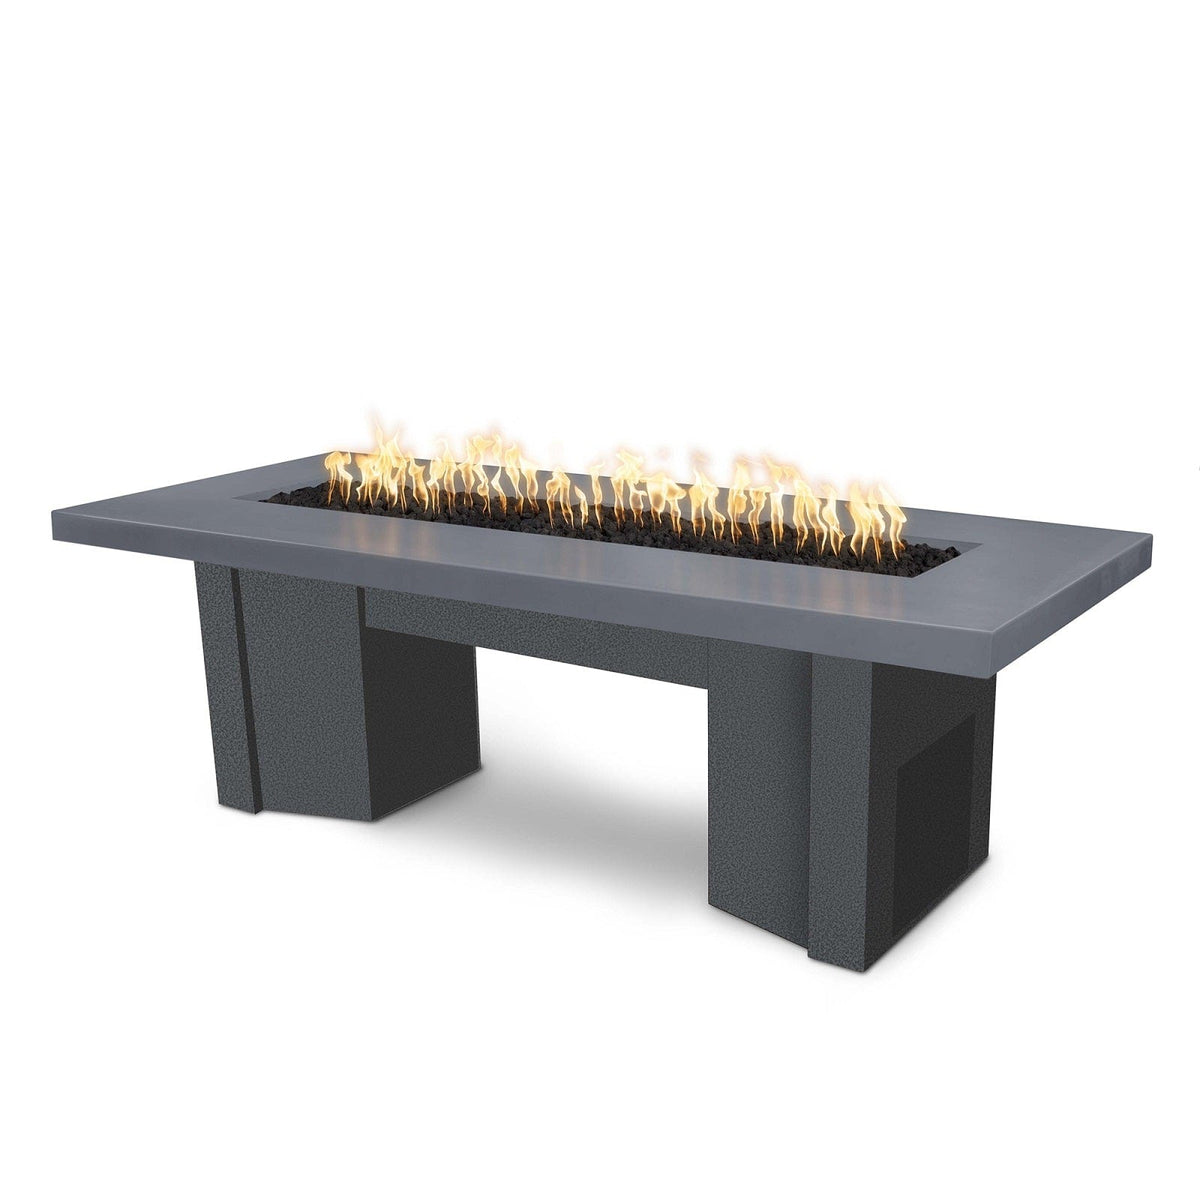 The Outdoor Plus Fire Features Gray (-GRY) / Silver Vein Powder Coated Steel (-SLV) The Outdoor Plus 78&quot; Alameda Fire Table Smooth Concrete in Liquid Propane - Match Lit with Flame Sense System / OPT-ALMGFRC78FSML-LP